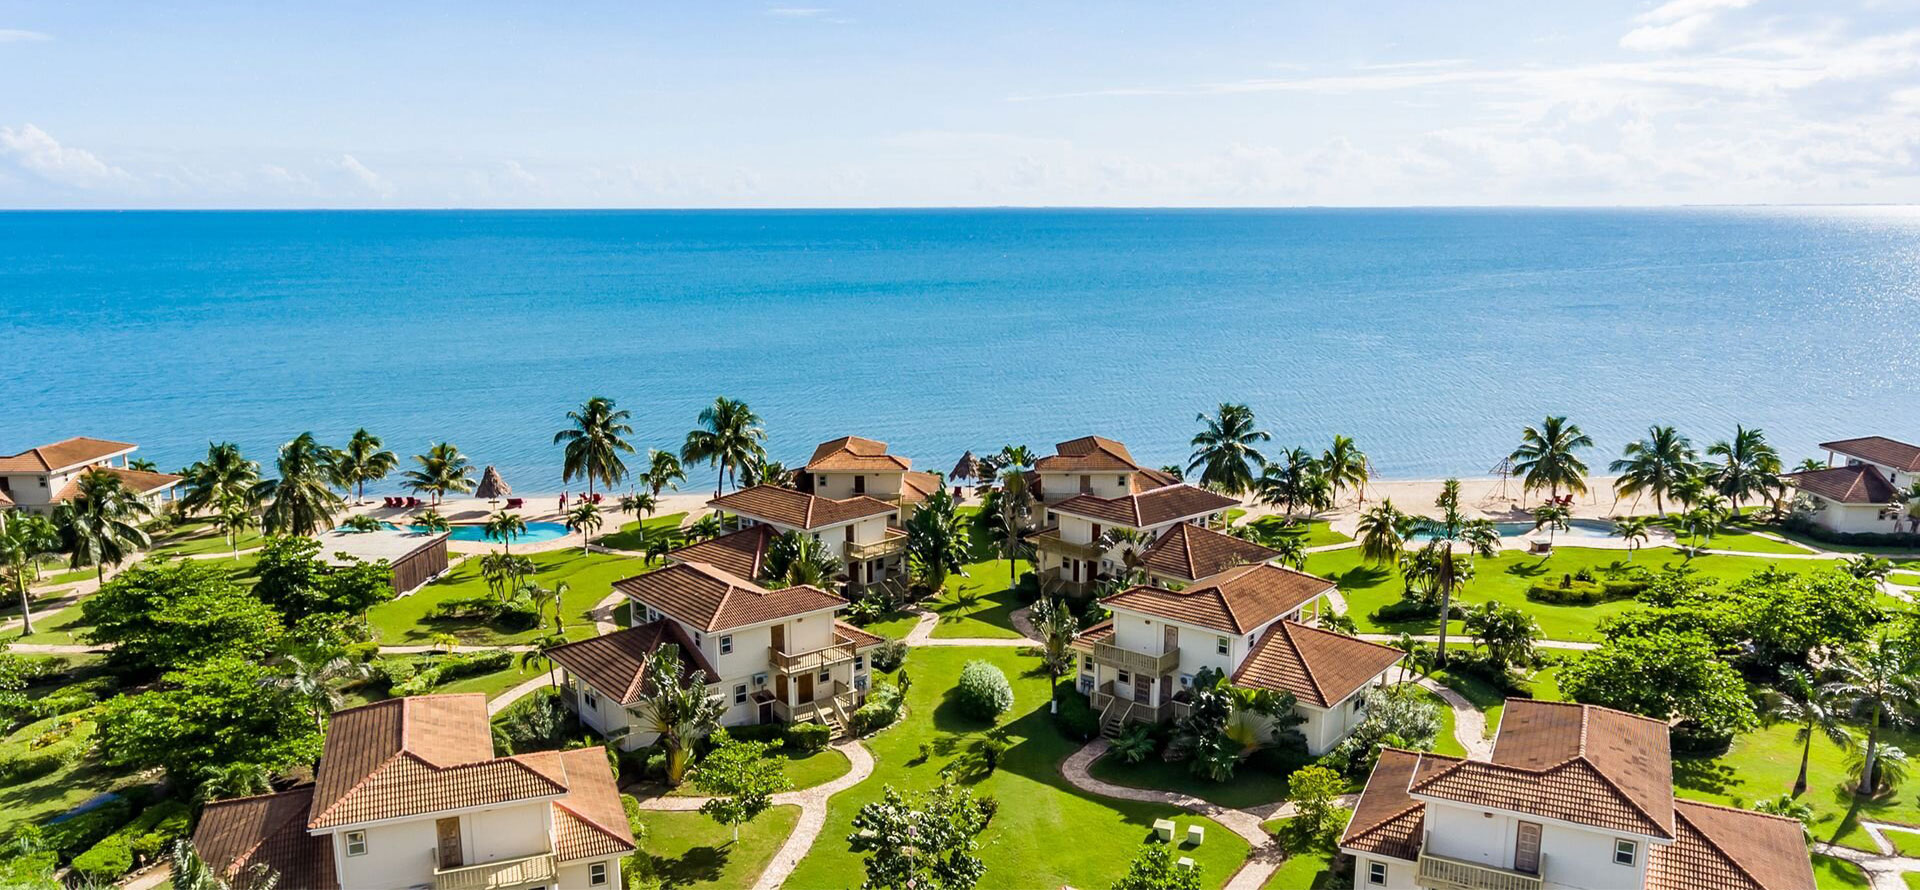 Top view of Belize all inclusive family resort.